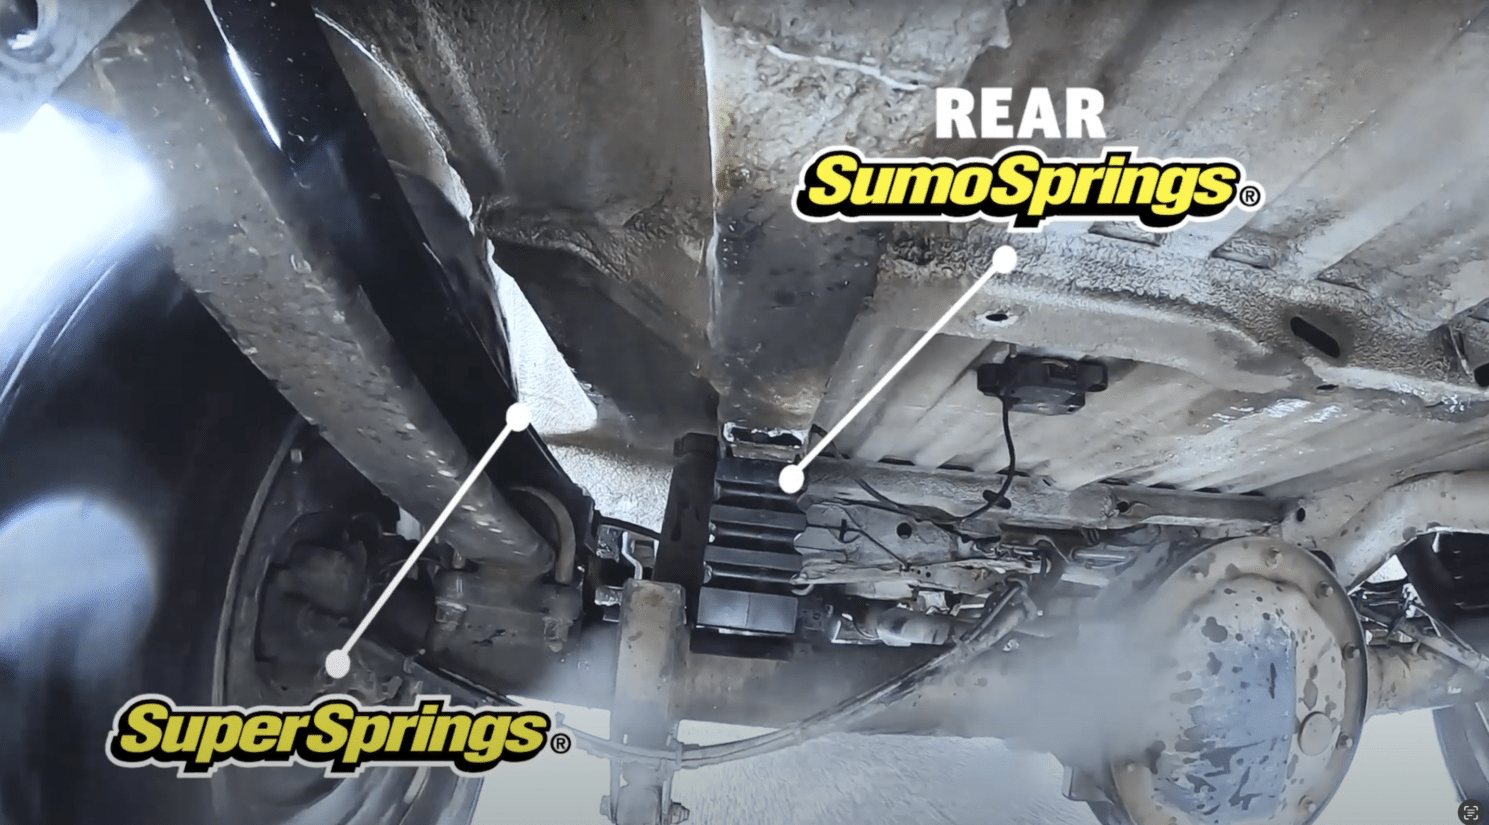 SumoSprings and SuperSprings installated on a van driving down the road